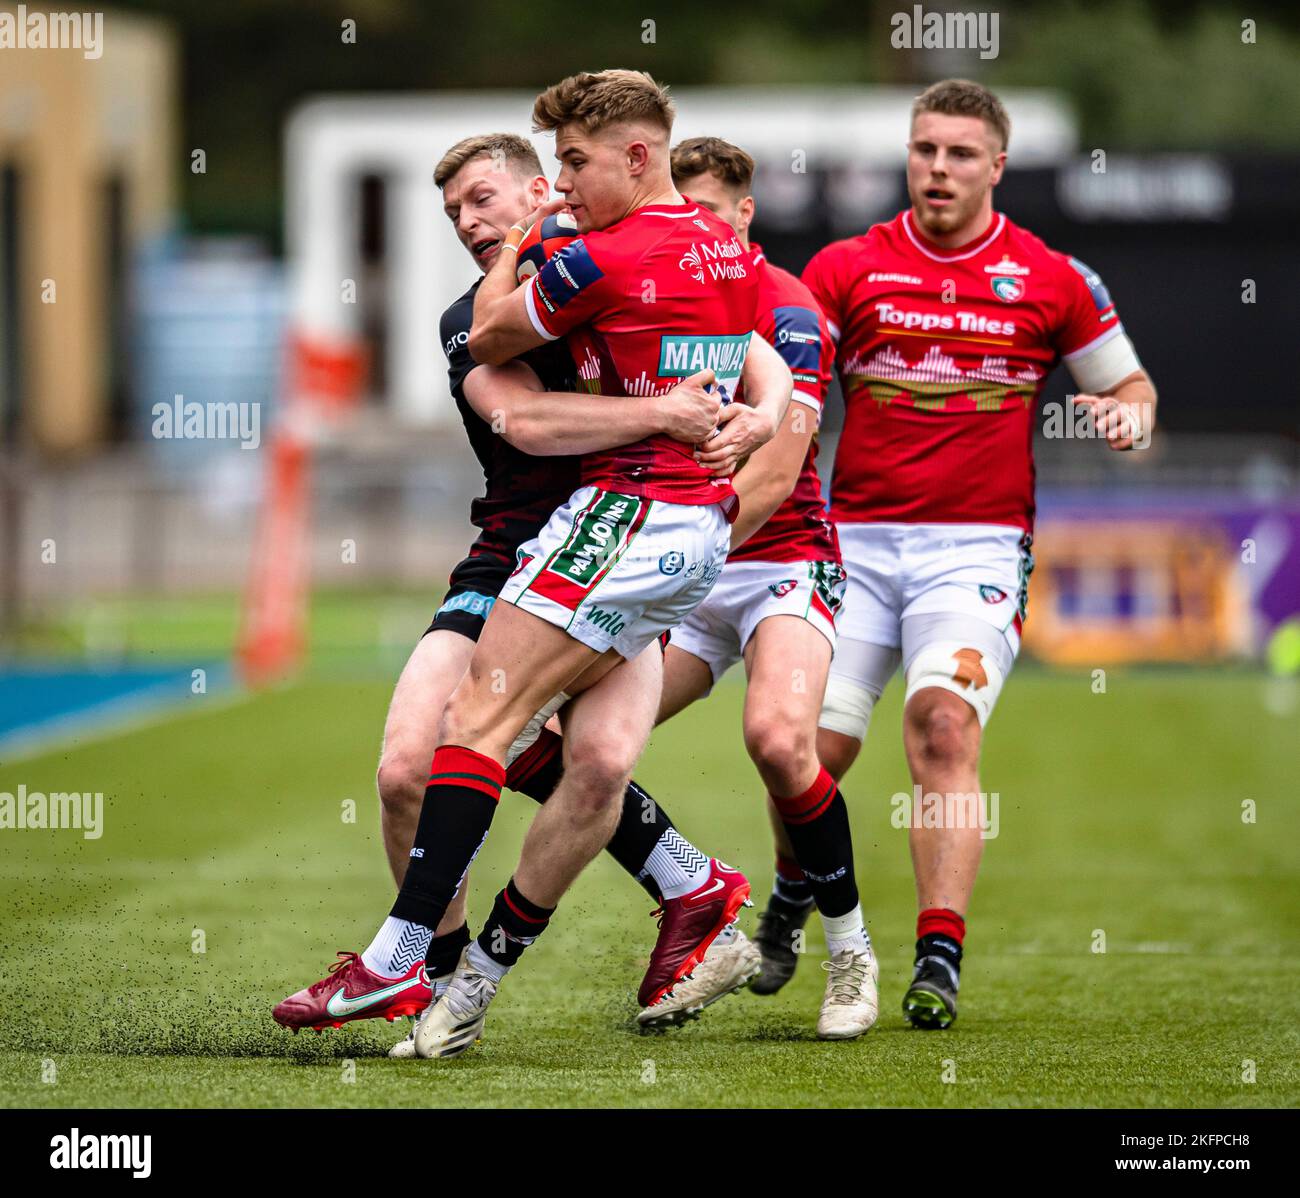 LONDON, UNITED KINGDOM. 19th, Nov 2022. Charlie Atkinson of Leicester Tigers (centre) is tackled during Premiership Rugby Match Round 4 between Saracens vs Leicester Tigers at StoneX Stadium on Saturday, 19 November 2022. LONDON ENGLAND.  Credit: Taka G Wu/Alamy Live News Stock Photo